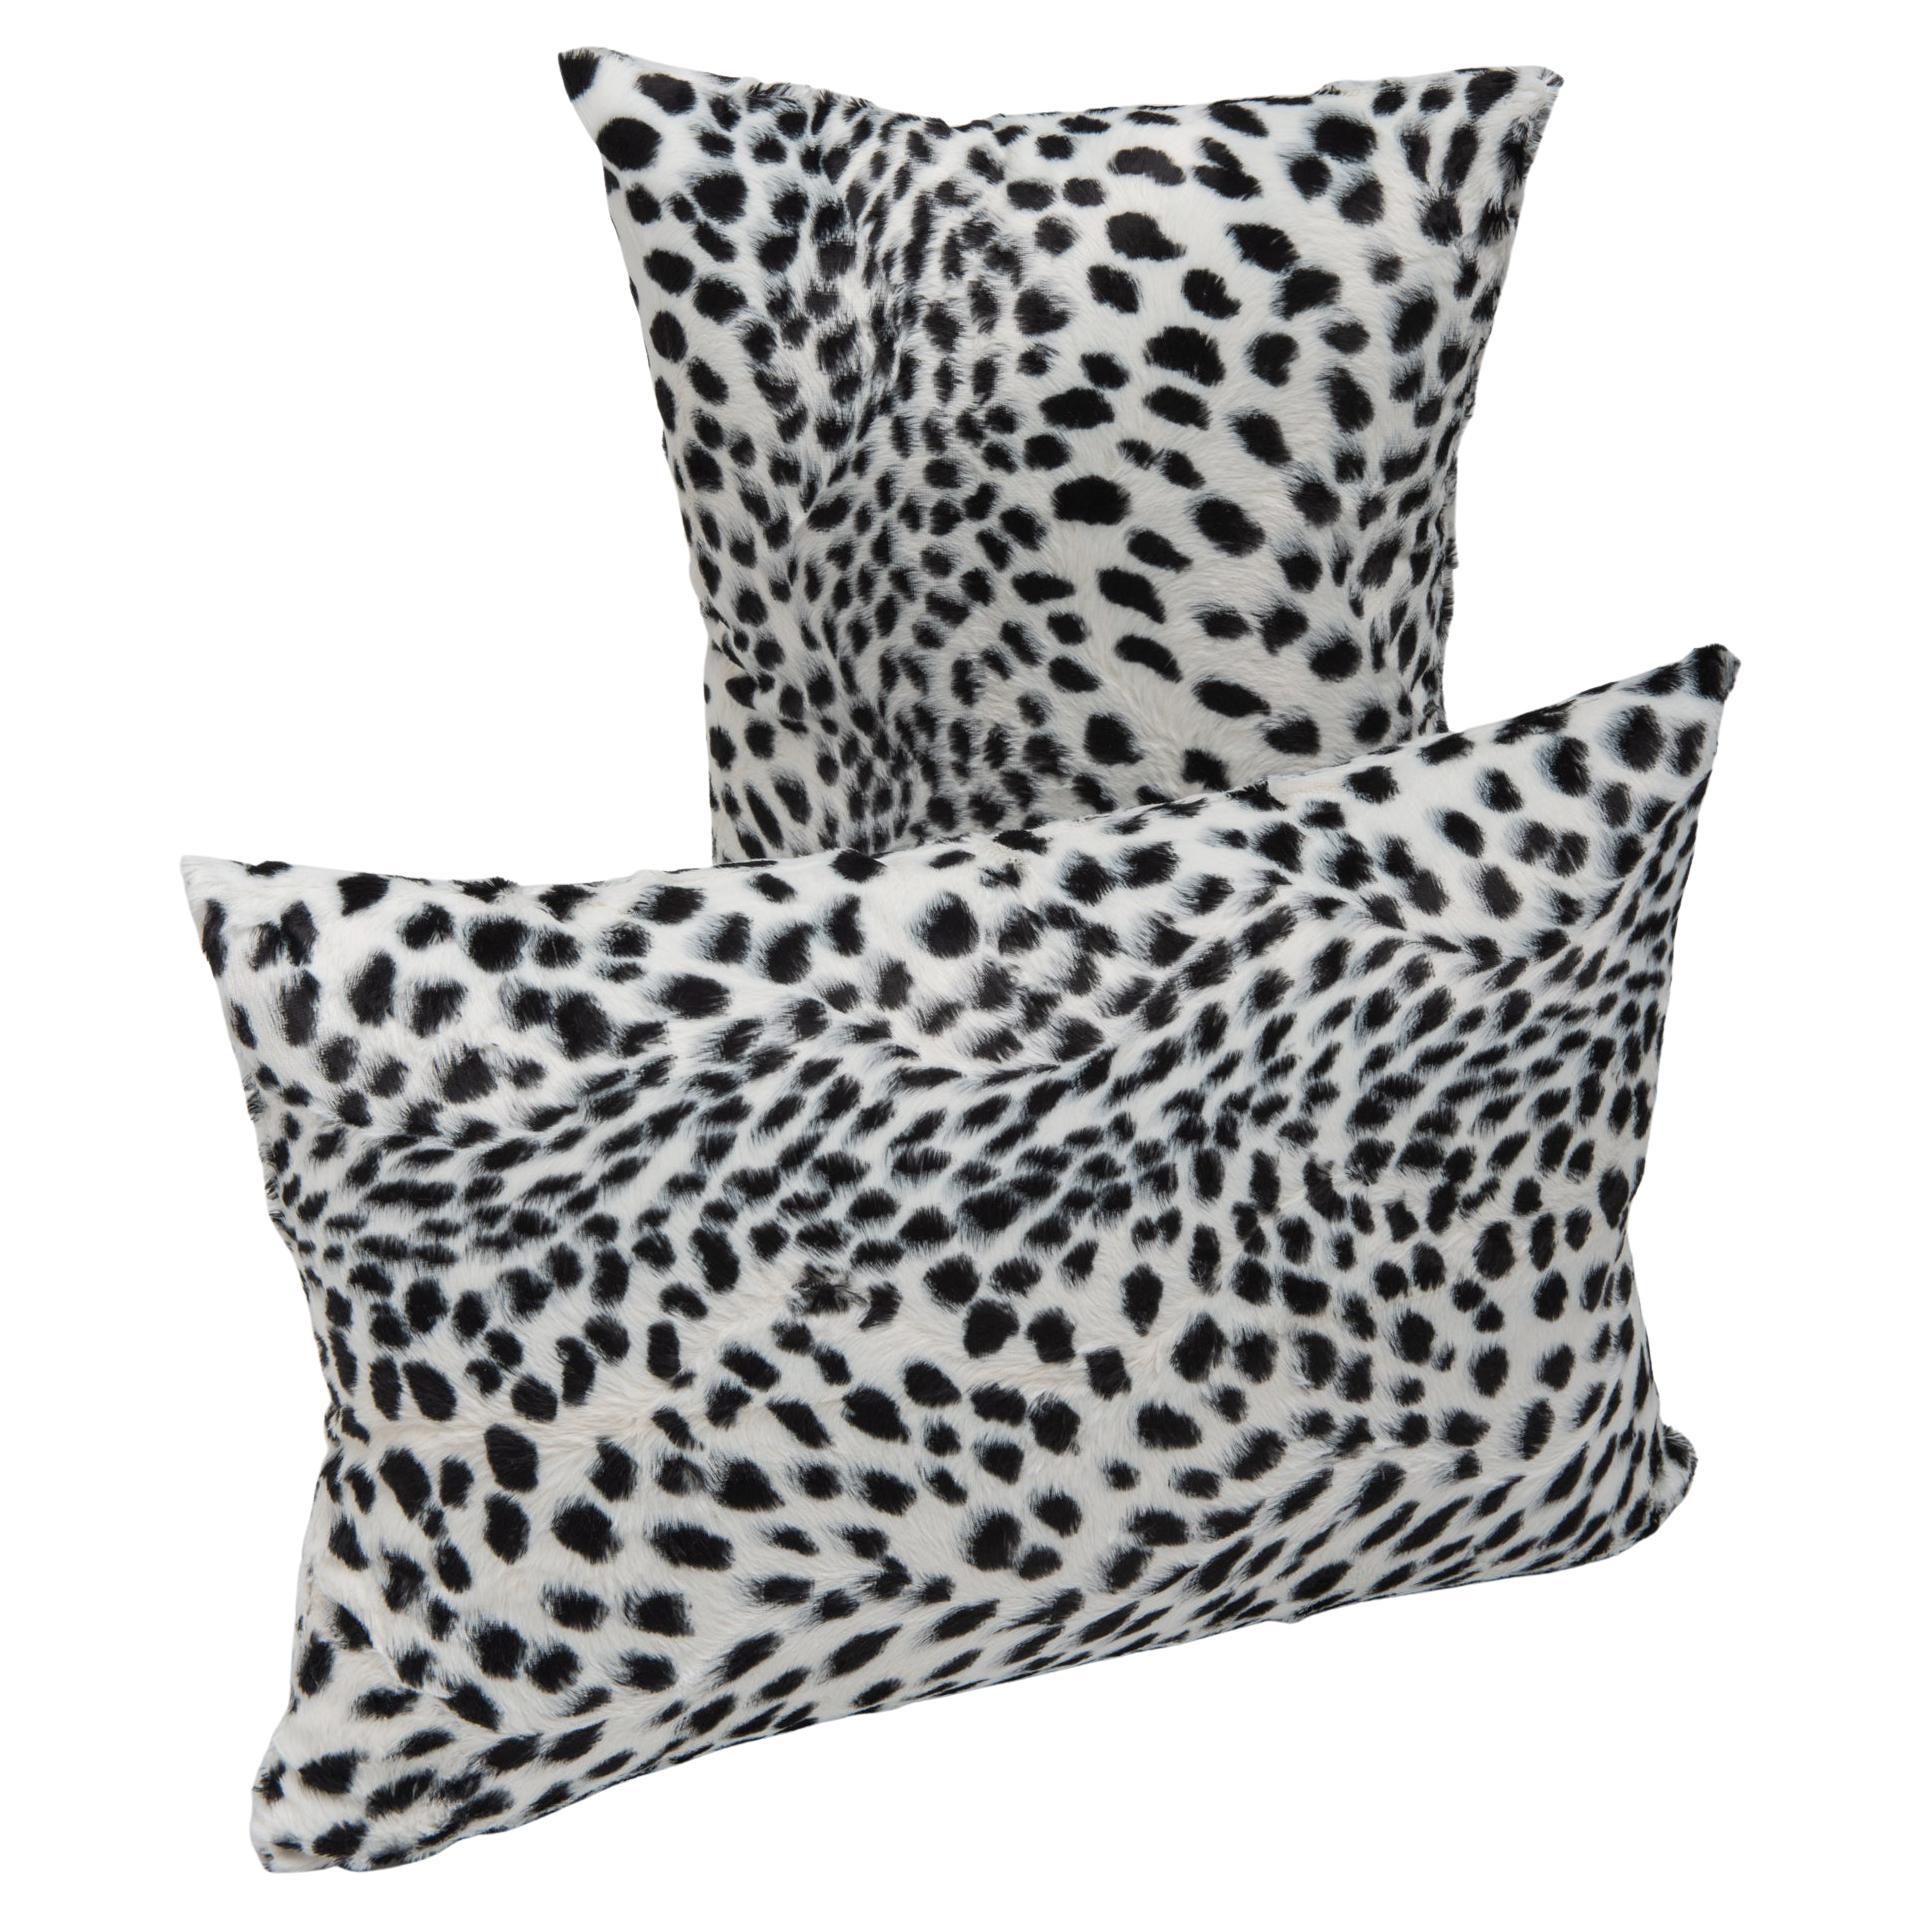 Pair of Pillows in Black and White Dalmatian Fabric